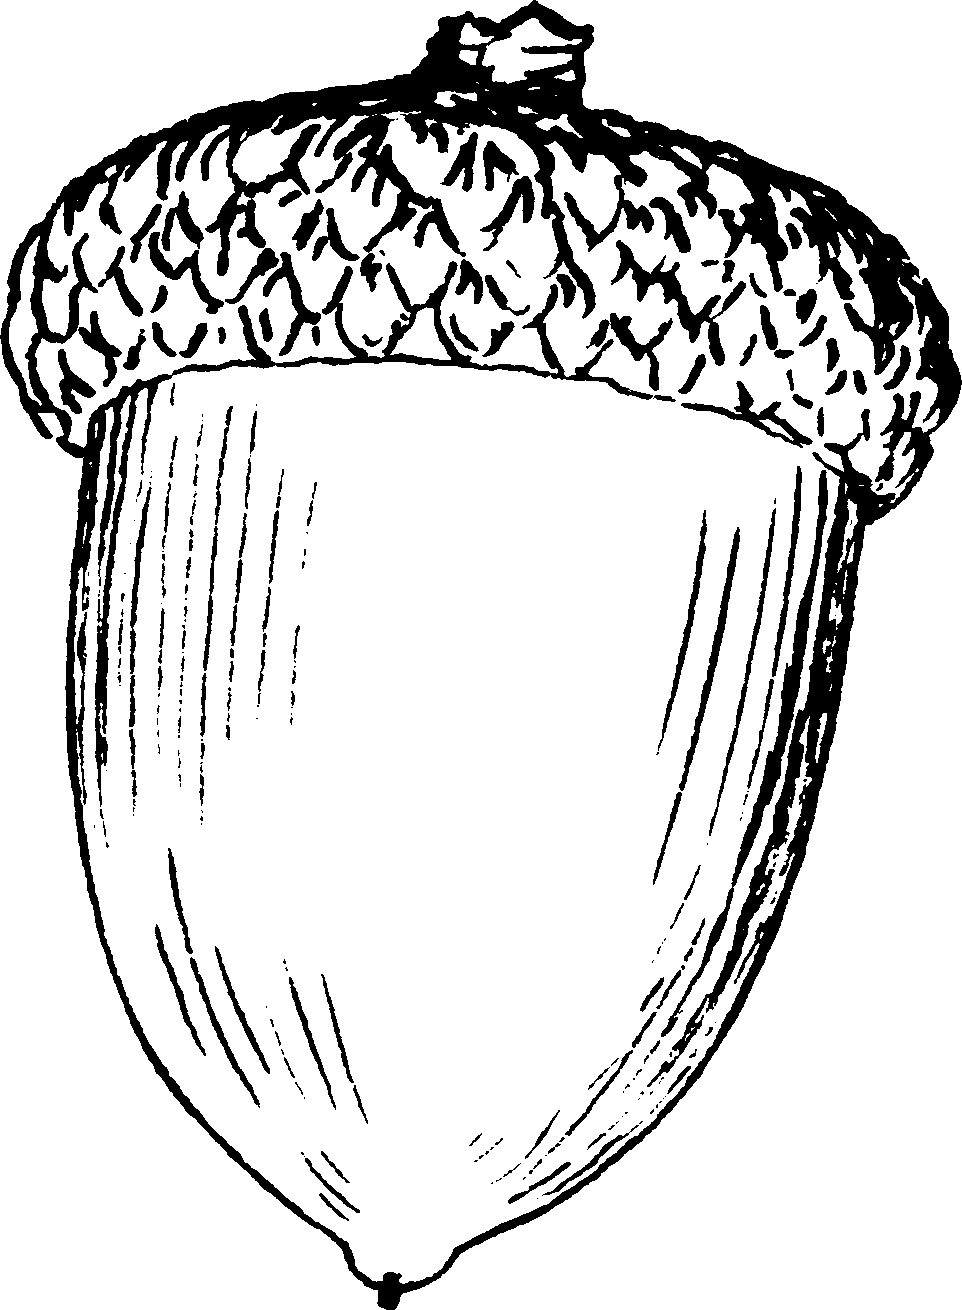 Free Acorn Drawing, Download Free Clip Art, Free Clip Art on.